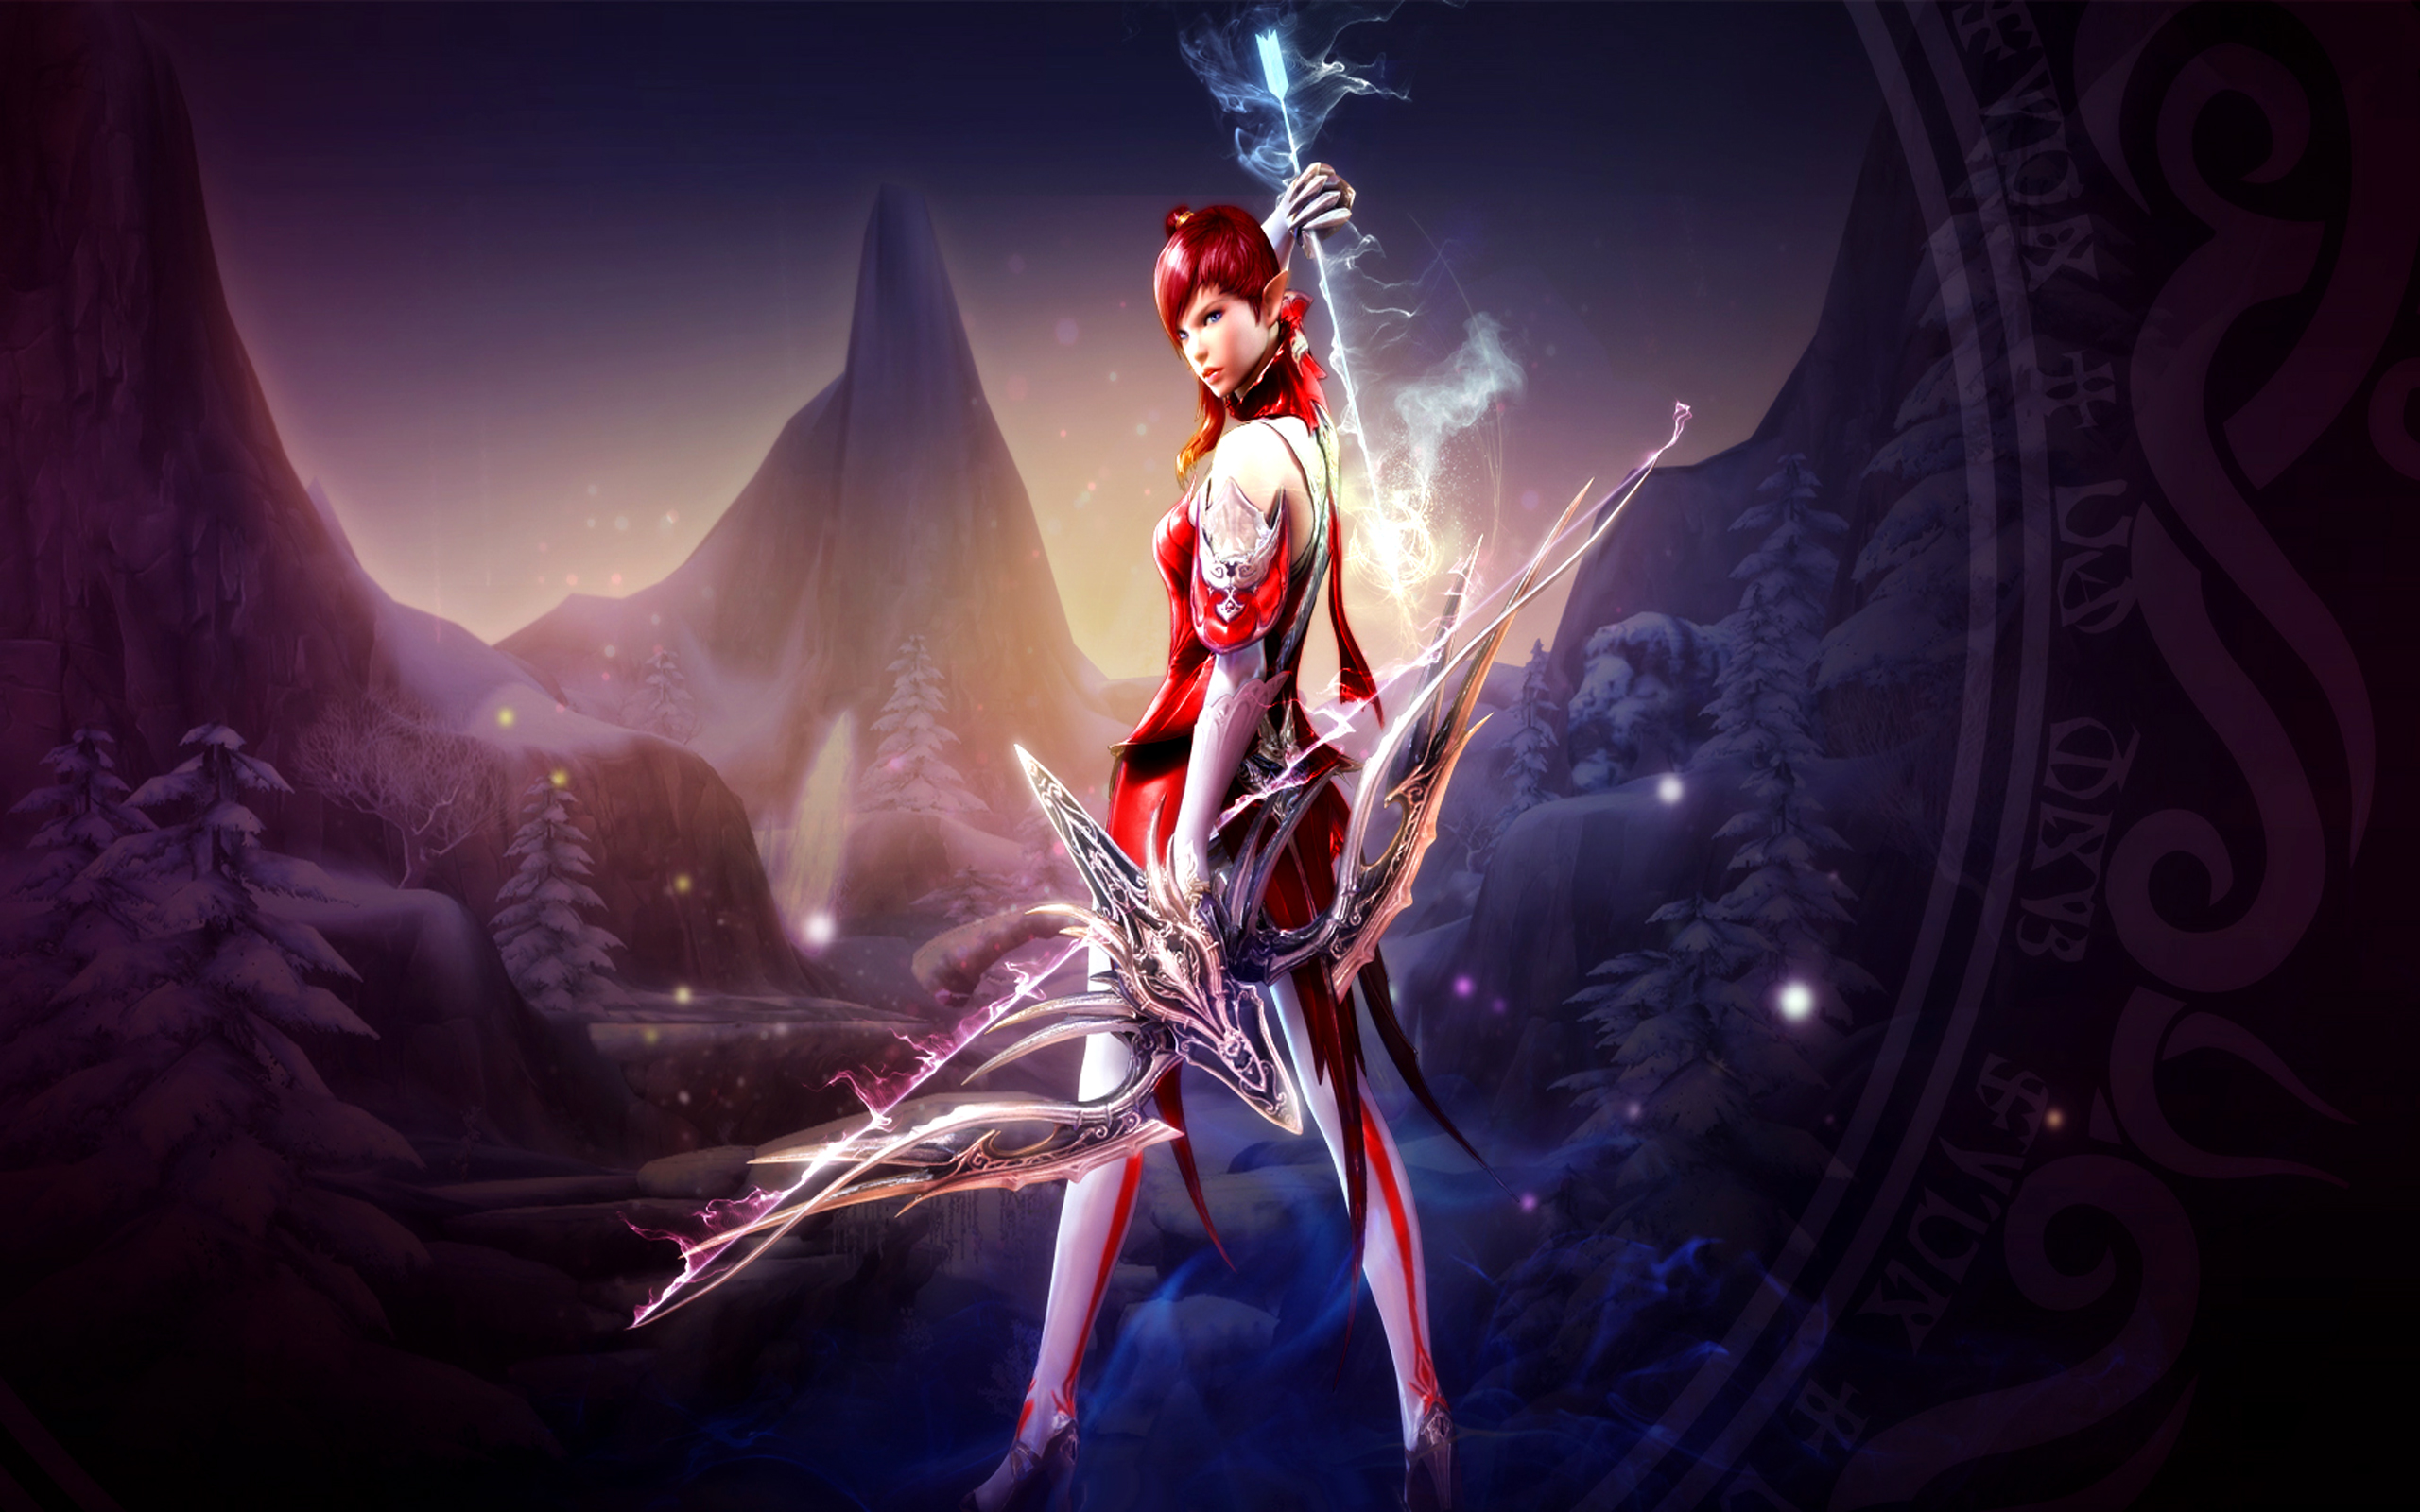 aion, video game cell phone wallpapers